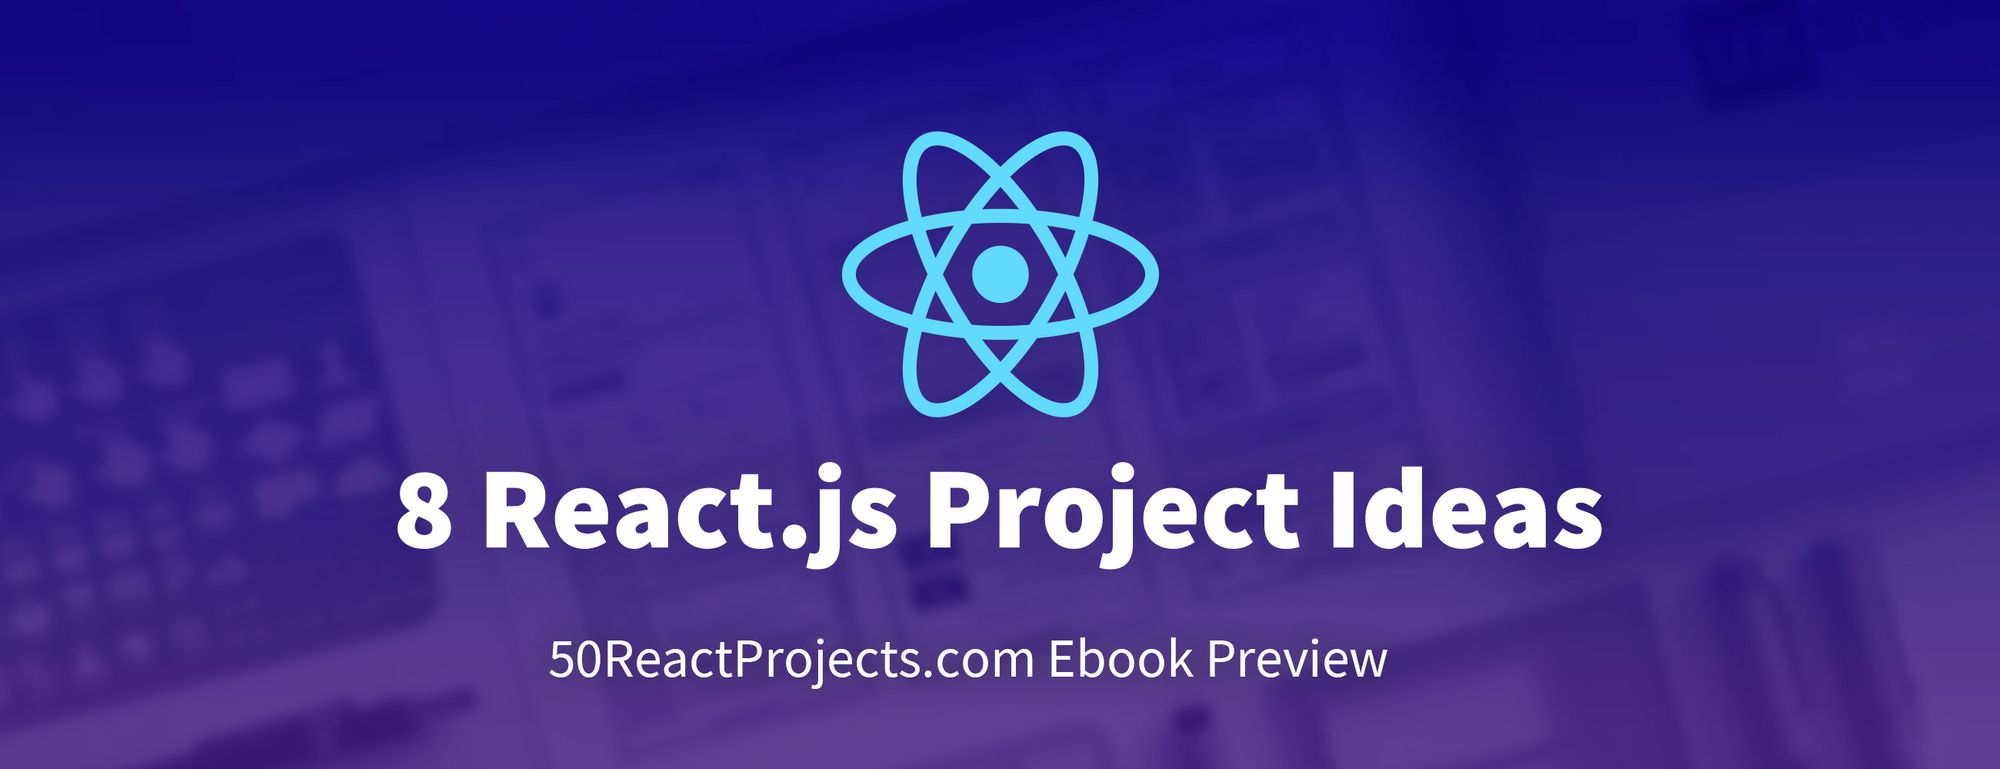 8 React.js Project Ideas to Help You Start Learning by Doing